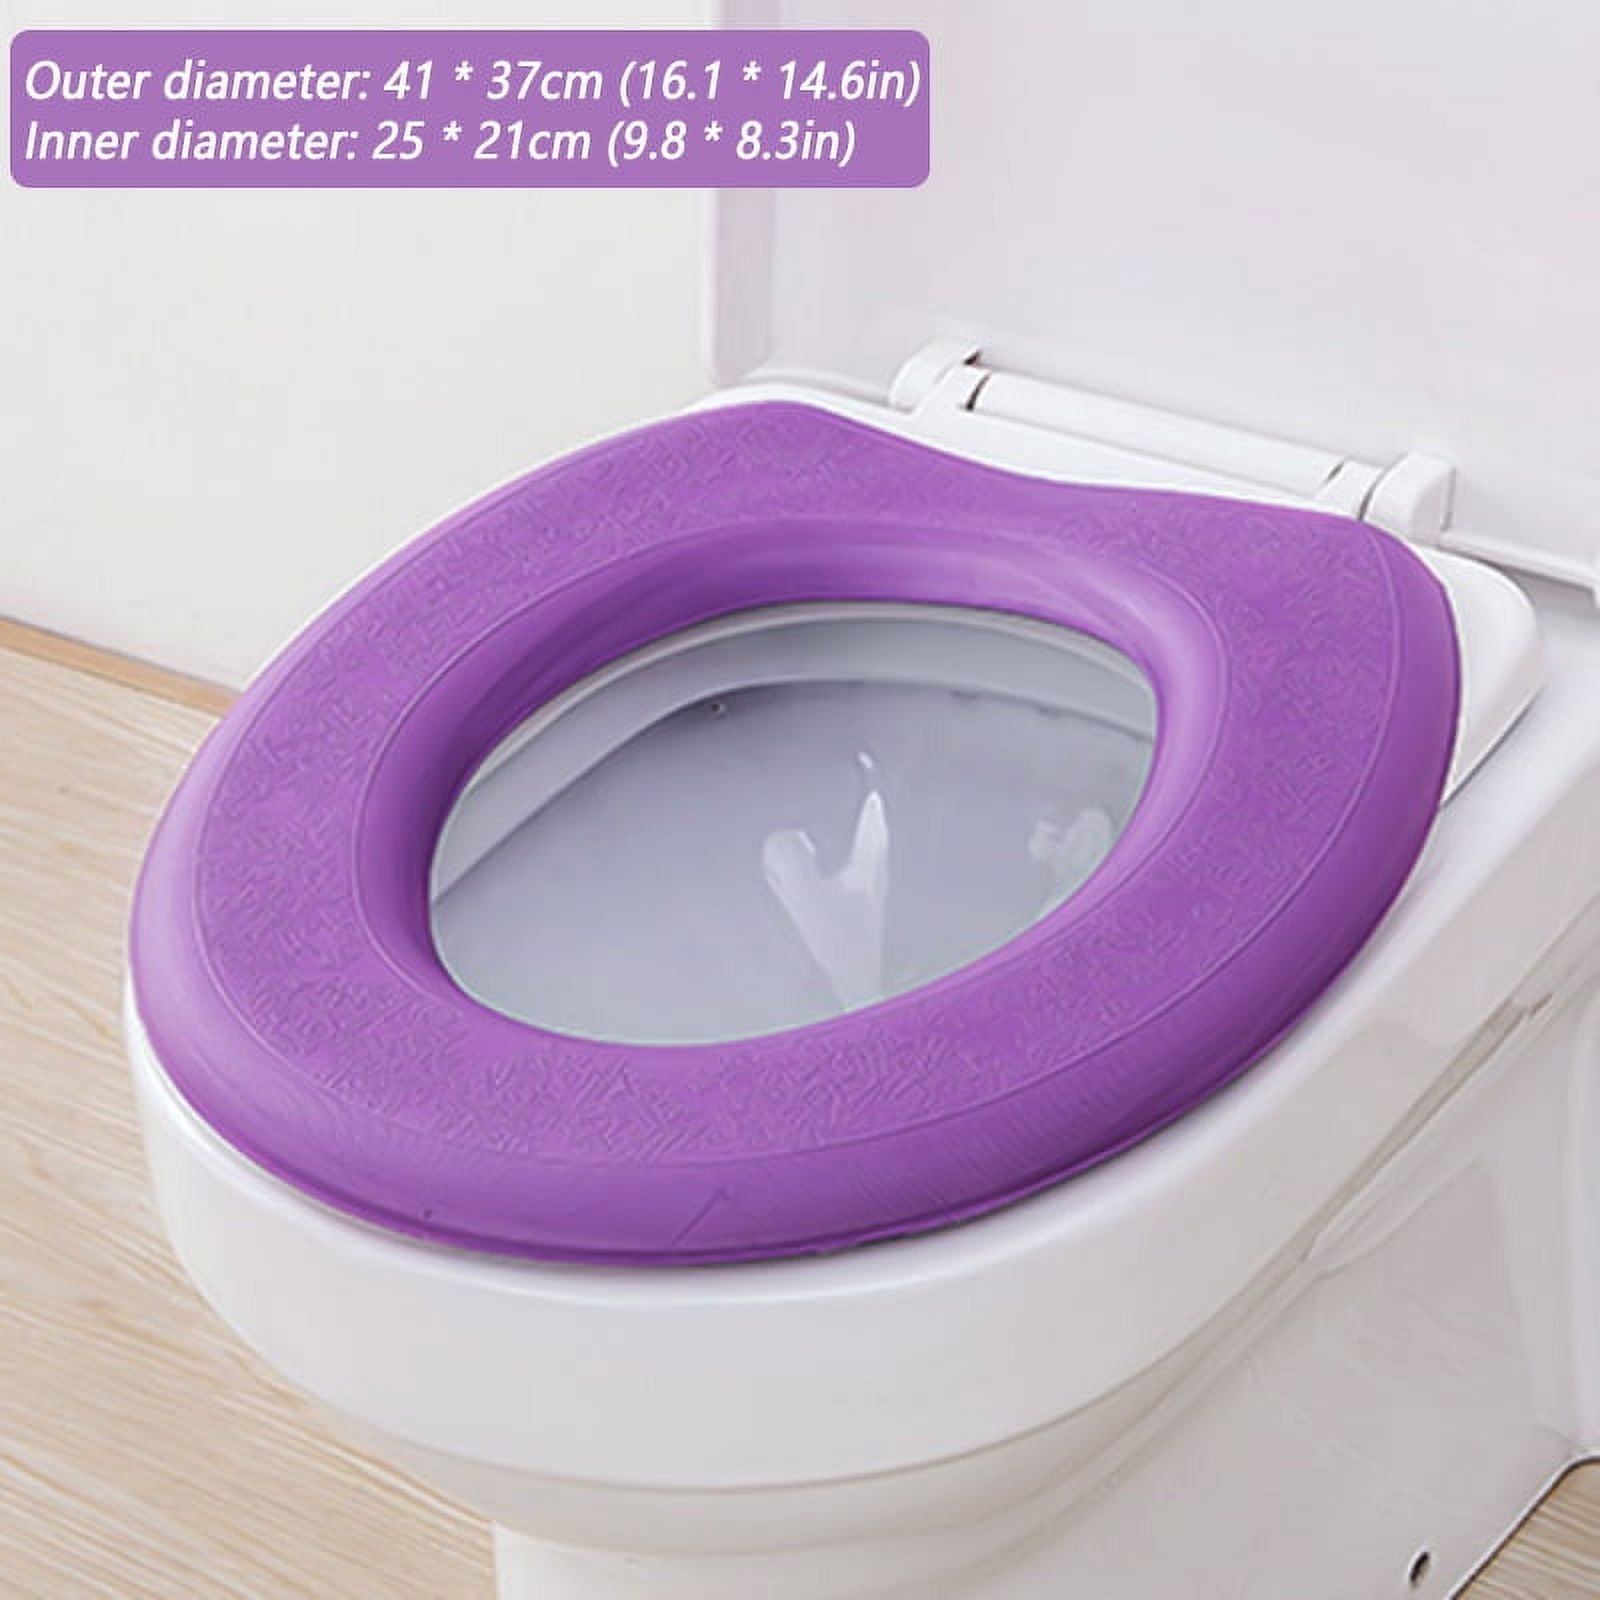 Toilet Seat Cushion Waterproof Soft Toilet Seat Cover Durable Warm Soft Pad  For Bathroom Toilet New 